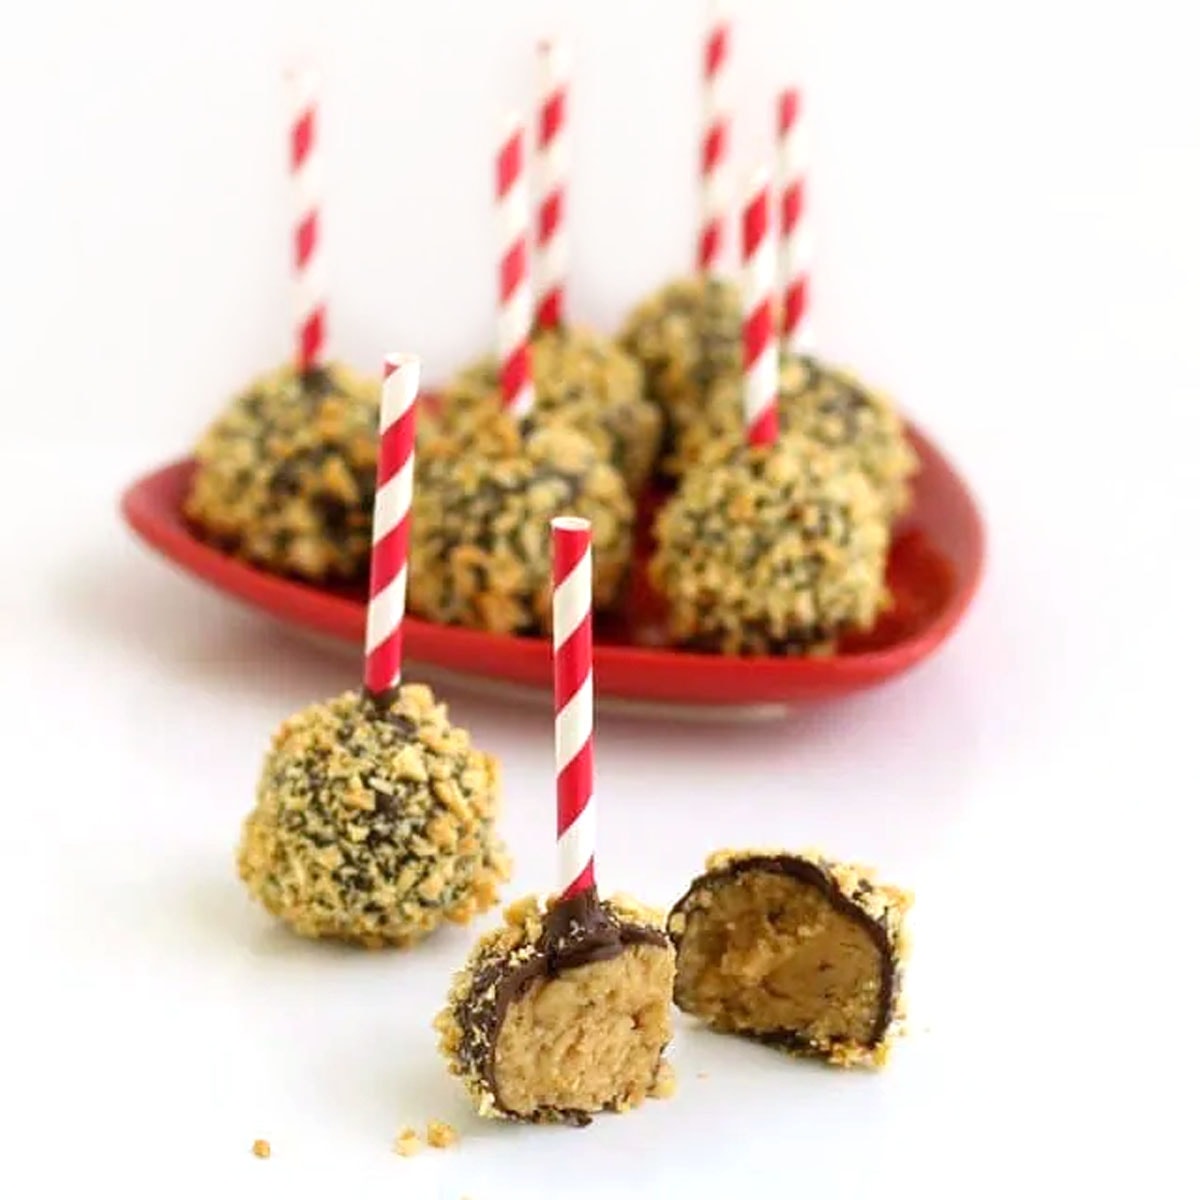 chocolate-dipped peanut-coated peanut butter potato candy on red and white striped lollipop sticks